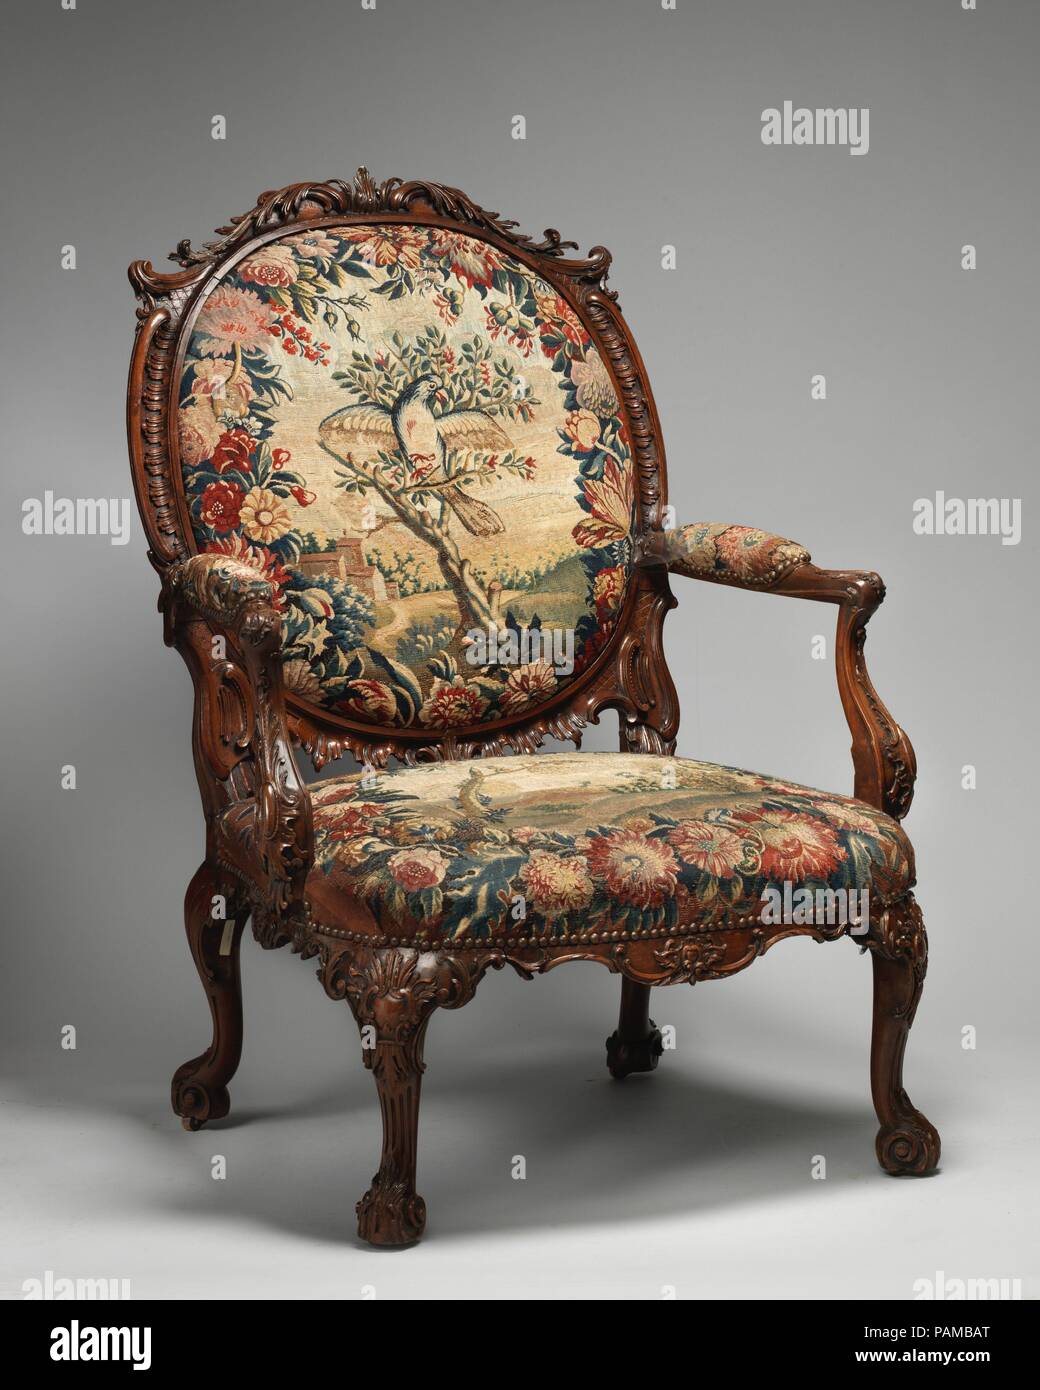 Armchair (one of four). Culture: British and French, probably Beauvais. Dimensions: Overall: 44 × 32 × 28 in. (111.8 × 81.3 × 71.1 cm). Factory: Tapestry probably woven at Royal Manufactory Beauvais 1664-1789. Date: 1755-65.  This rococo chair is part of a larger set of seat furniture supplied to the third Duke of Ancaster (1714-1778) for Grimsthorpe Castle, Lincolnshire. Executed in the French taste, fashionable in mid-eighteenth century England, the set was originally partly gilt and upholstered with Gobelins tapestry (now in the Rijksmuseum, Amsterdam) after designs by the painter François  Stock Photo